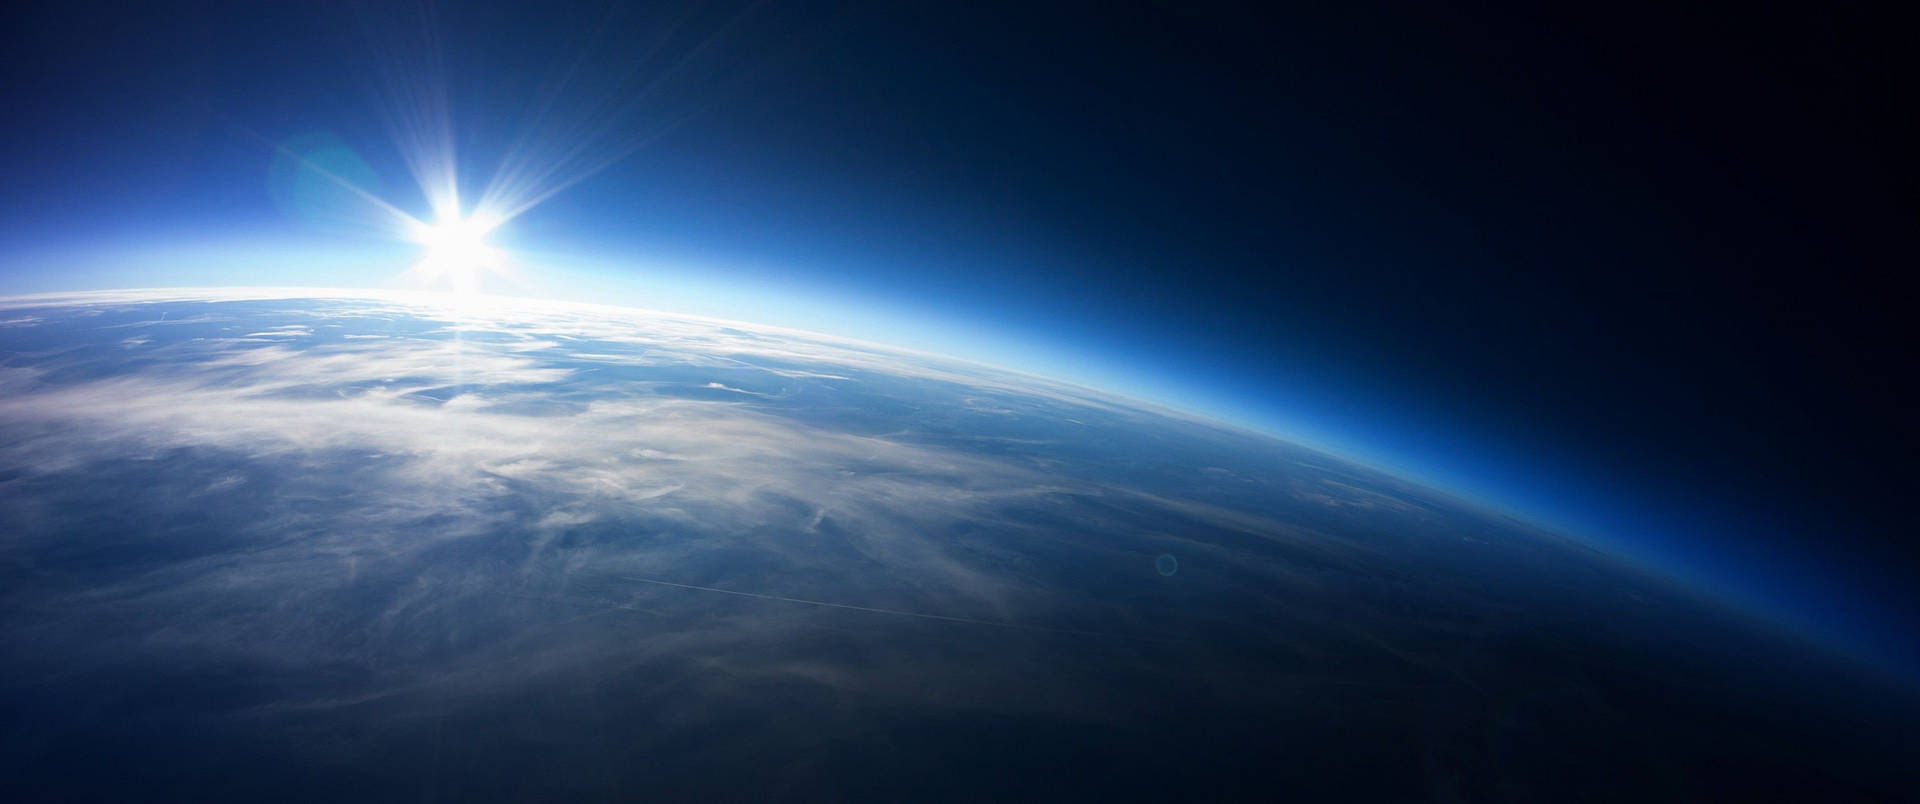 This Ultrawide View Of The Earth From Space Is Breathtaking Background